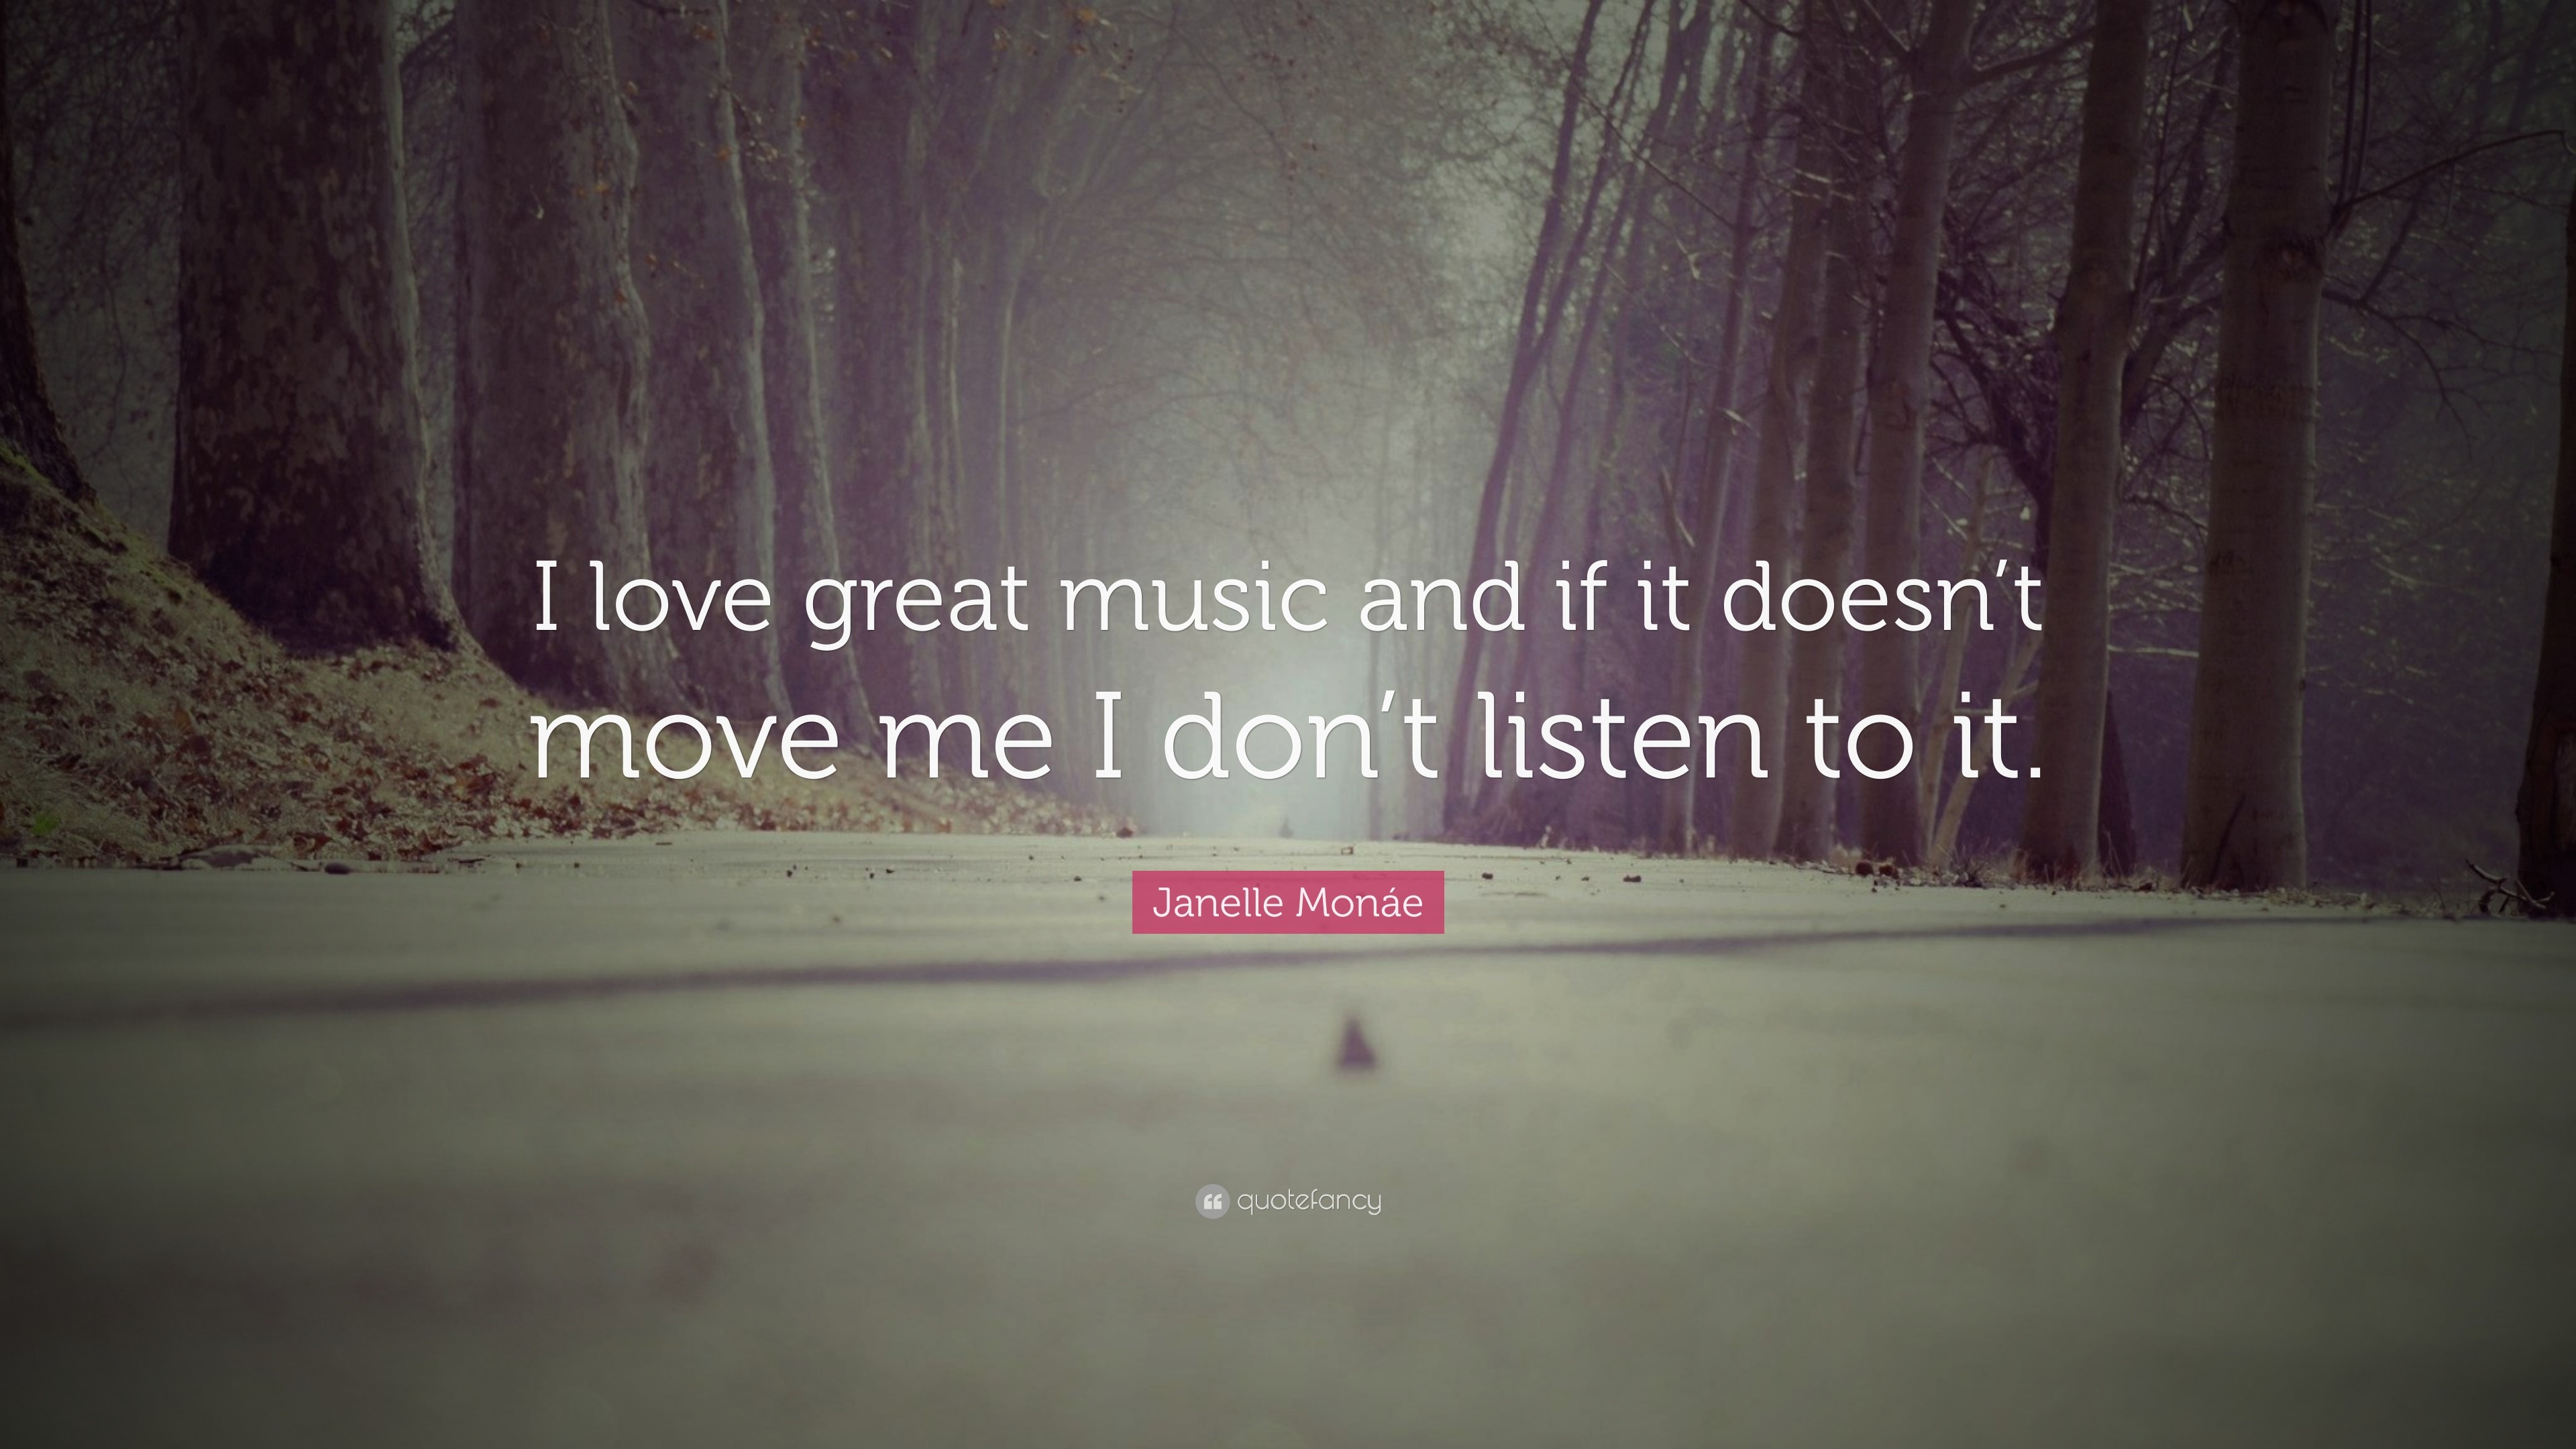 3840x2160 Janelle MonÃ¡e Quote: “I love great music and if it doesn't move